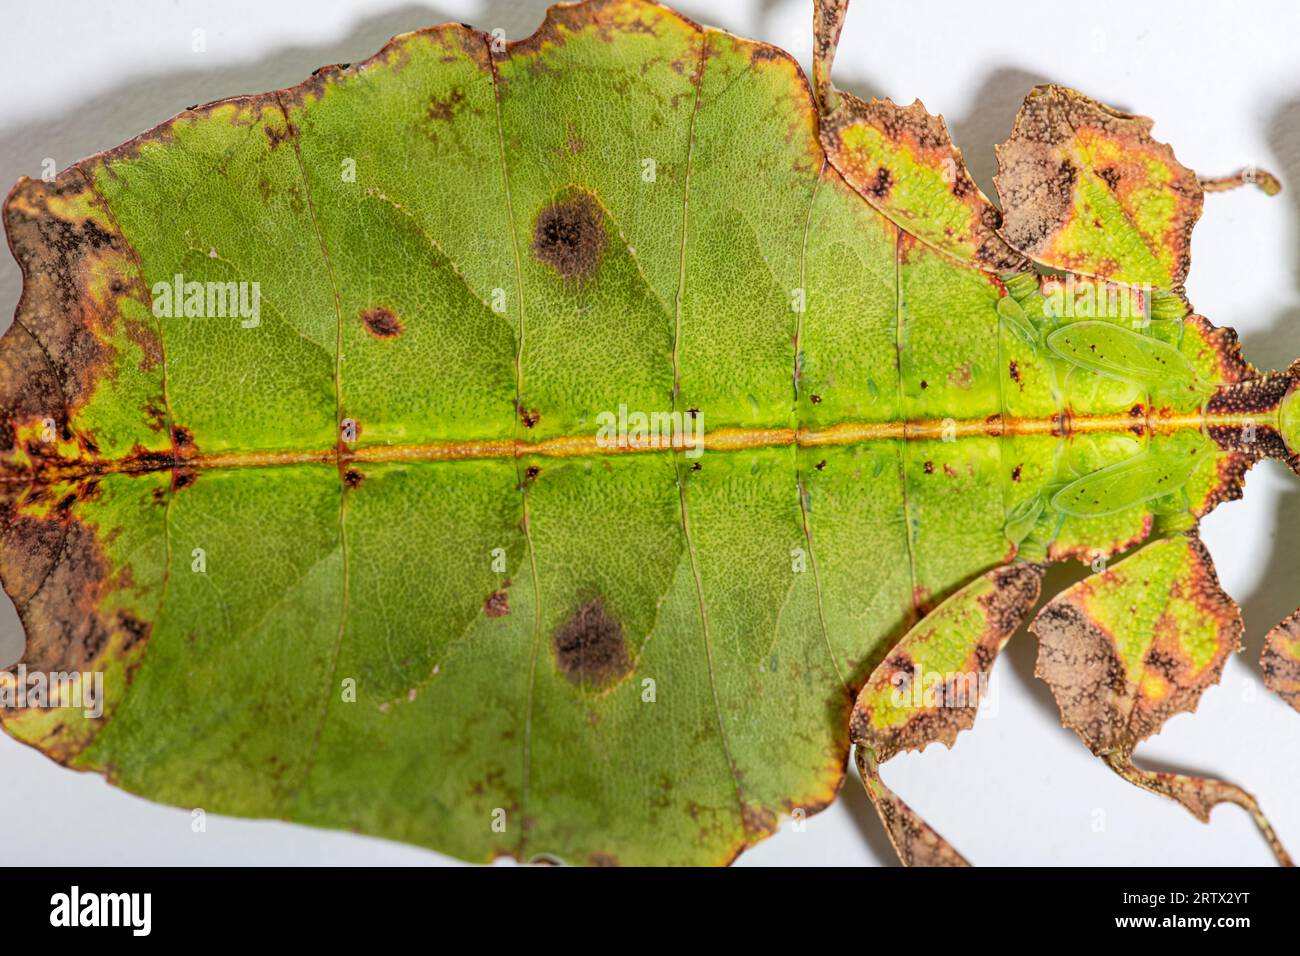 Top view of a Leaf-insect, Phyllium giganteum, isolated on white Stock Photo